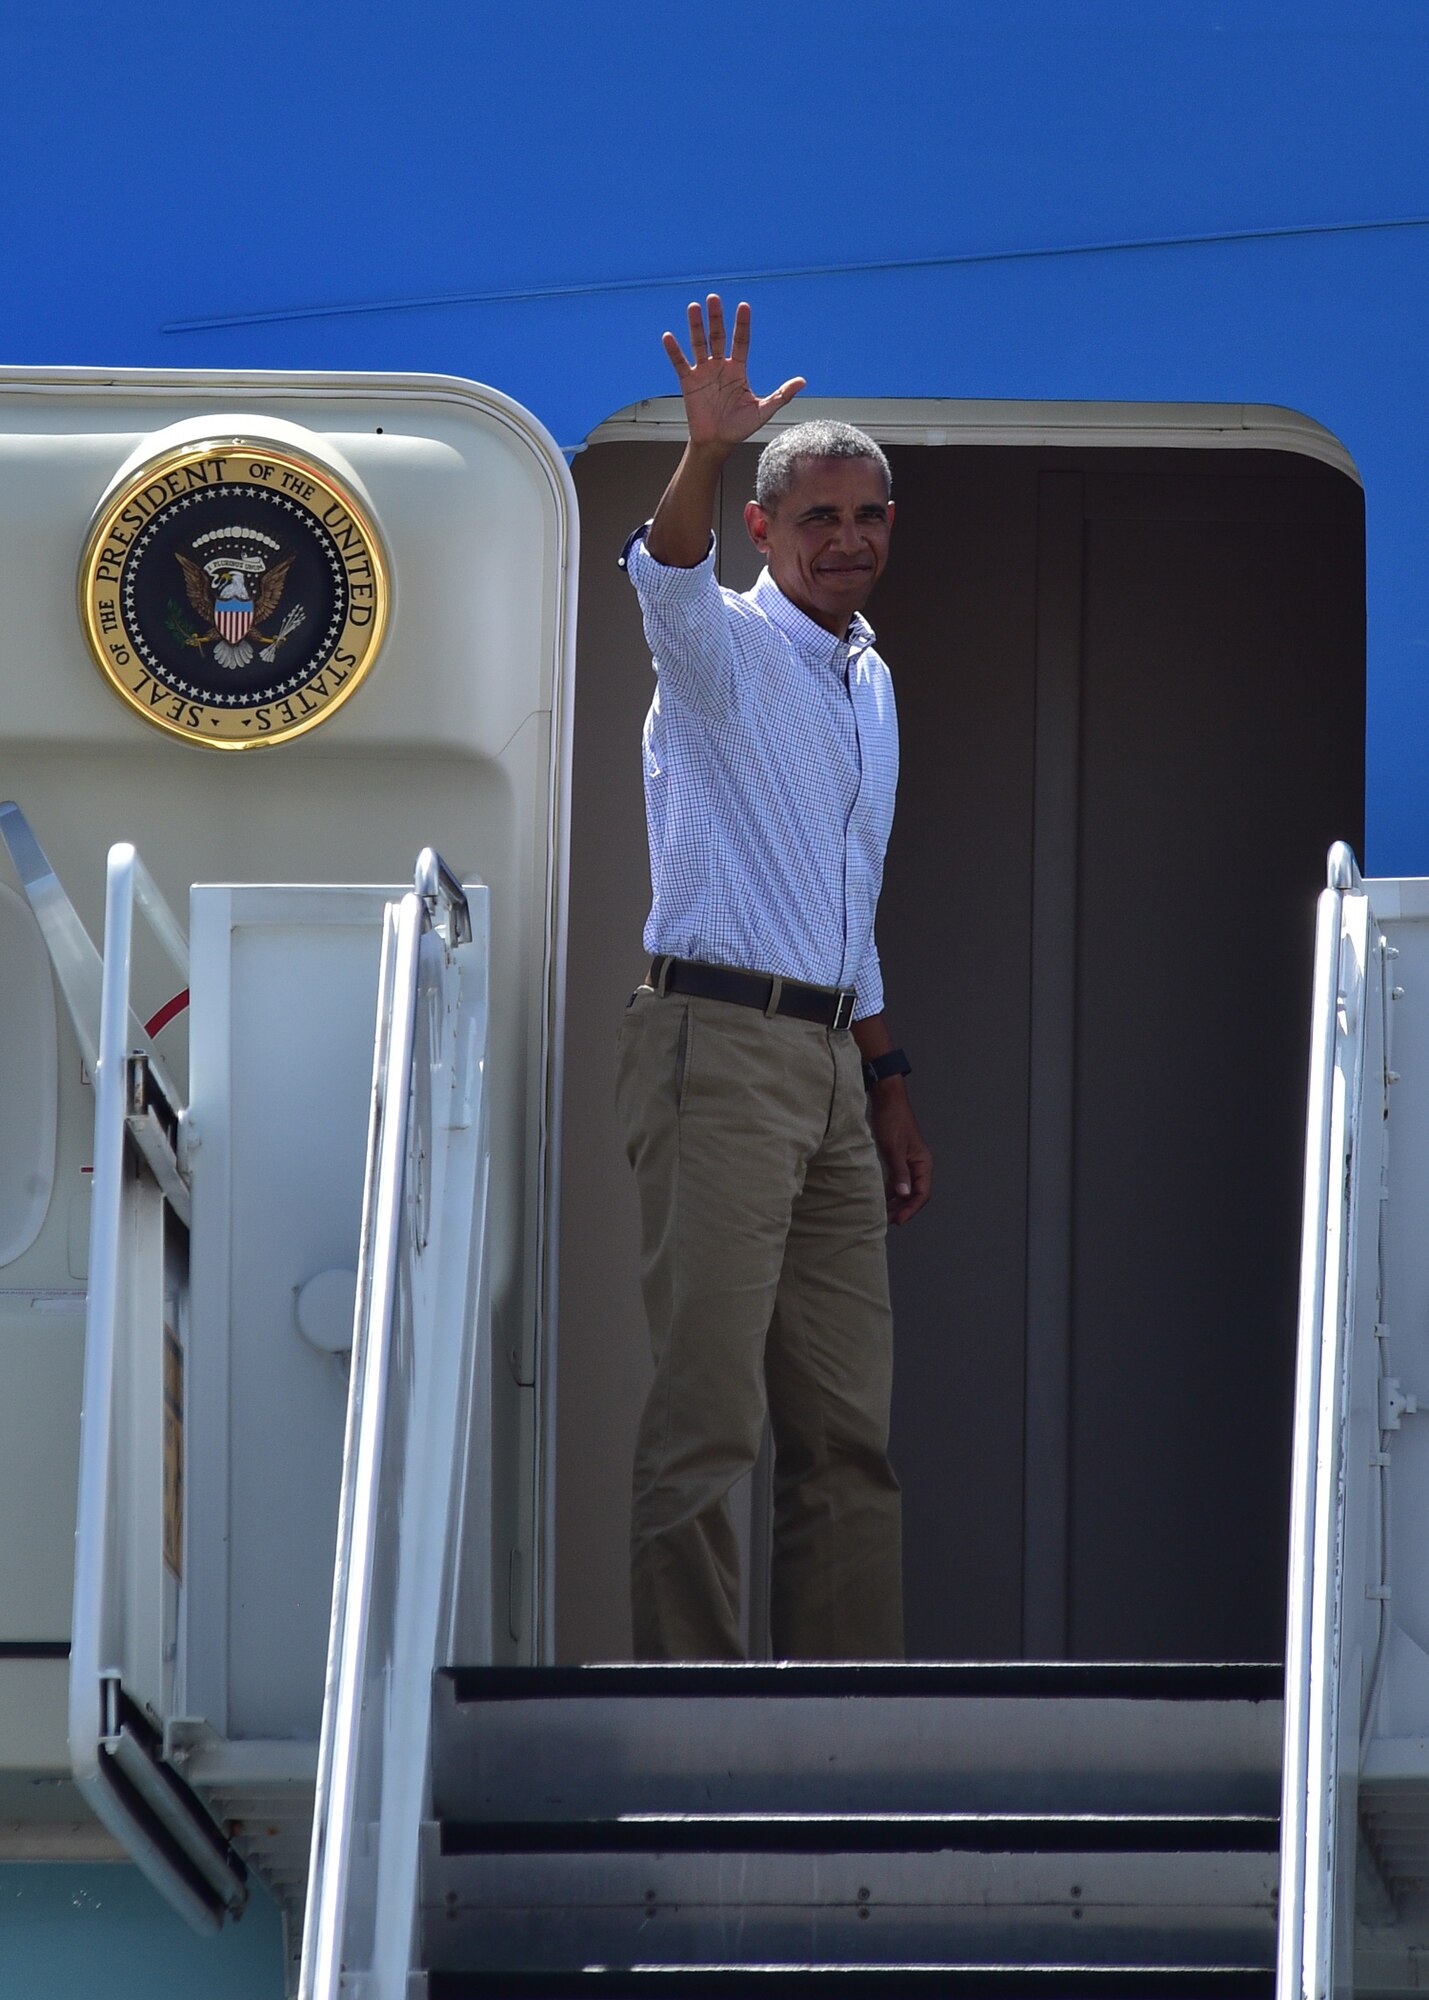 President Barack Obama gives one last wave before departing from Joint Base Pearl Harbor-Hickam, Hawaii, Sep. 2, 2016. President Obama was in Hawaii to speak at the Pacific Island Conference of Leaders and the International Union for Conservation of Nature World Conservation Congress. (U.S. Air Force Photo by Tech. Sgt. Aaron Oelrich/Released)